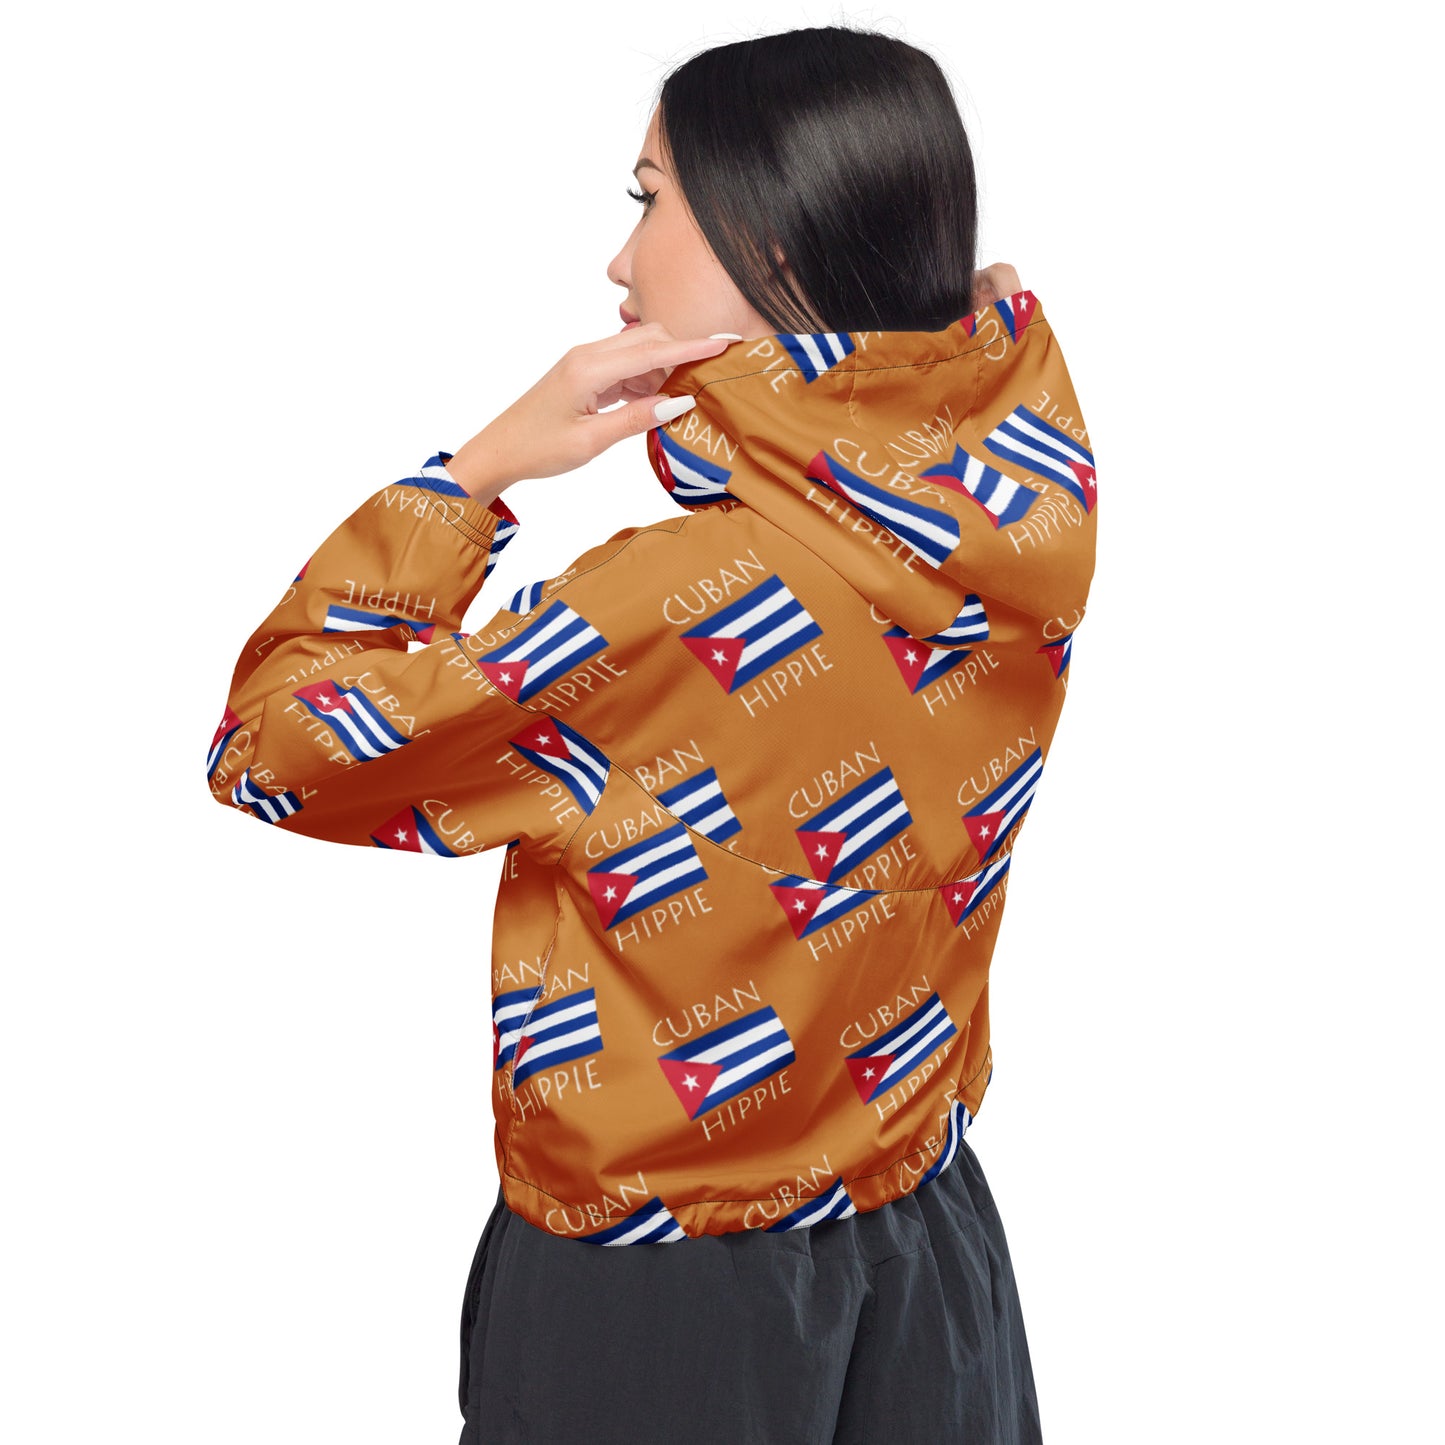 This Cuban Flag Hippie stylish cropped half-zip windbreaker is a fashion statement! The repeating Cuban Flag Hippie design is the coolest, hippest, trendiest piece in your wardrobe! Hike in style without the rain getting in the way...this cropped windbreaker is lightweight, waterproof, and suitable for every kind of adventure. Features include side-slit pockets, breathable mesh lining, and adjustable drawstrings on the hood and waist to support all your stylish outdoor looks.